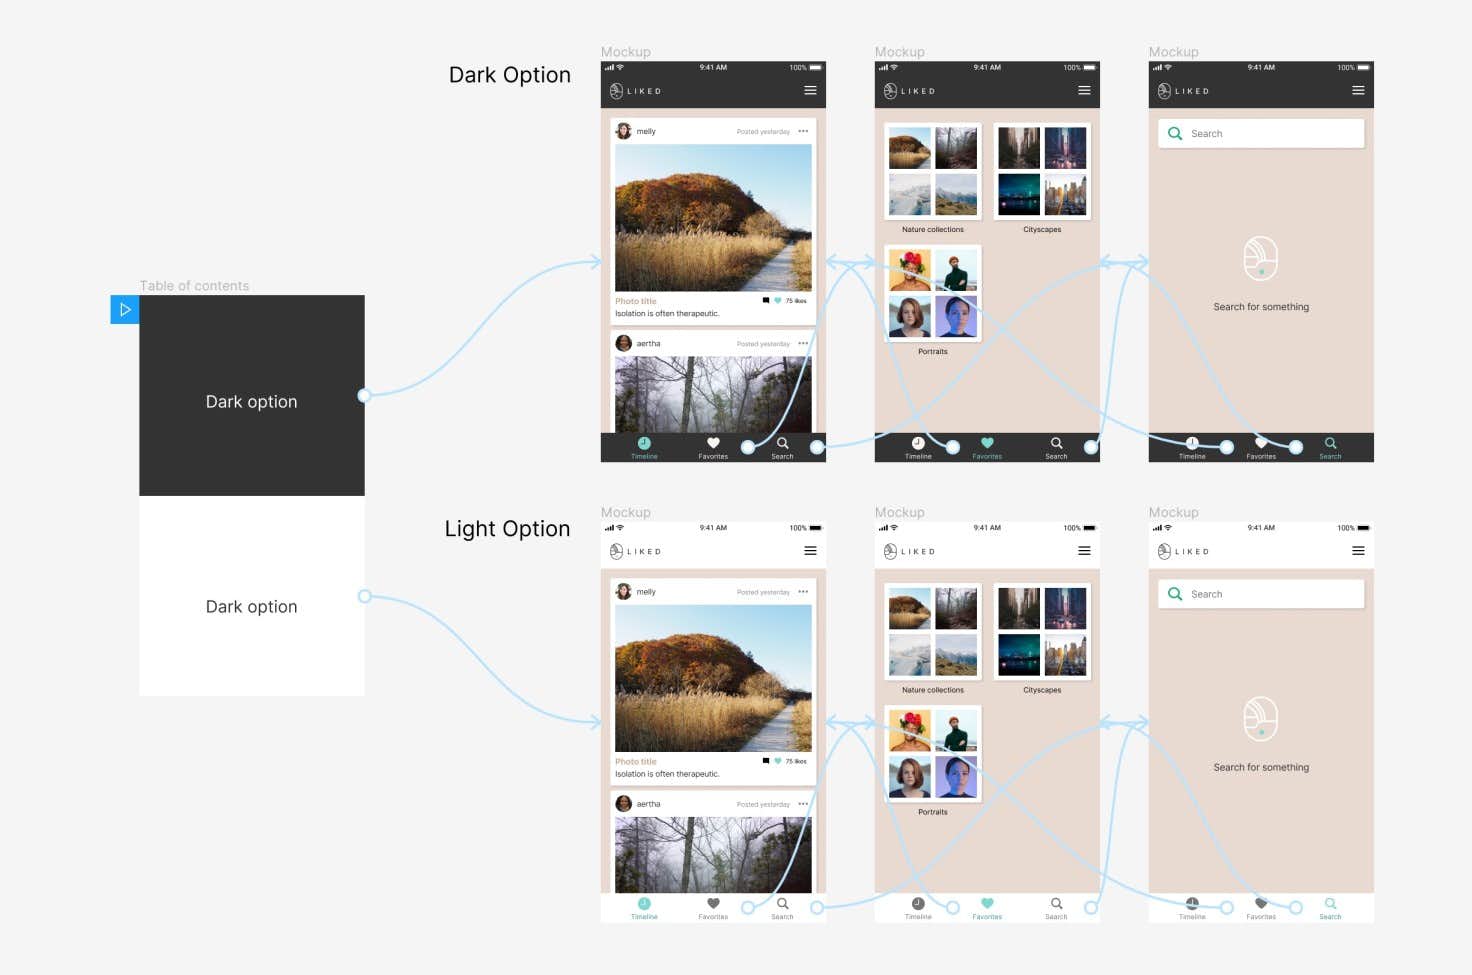 Creating an interactive demo out of static wireframes is super simple and intuitive in Figma